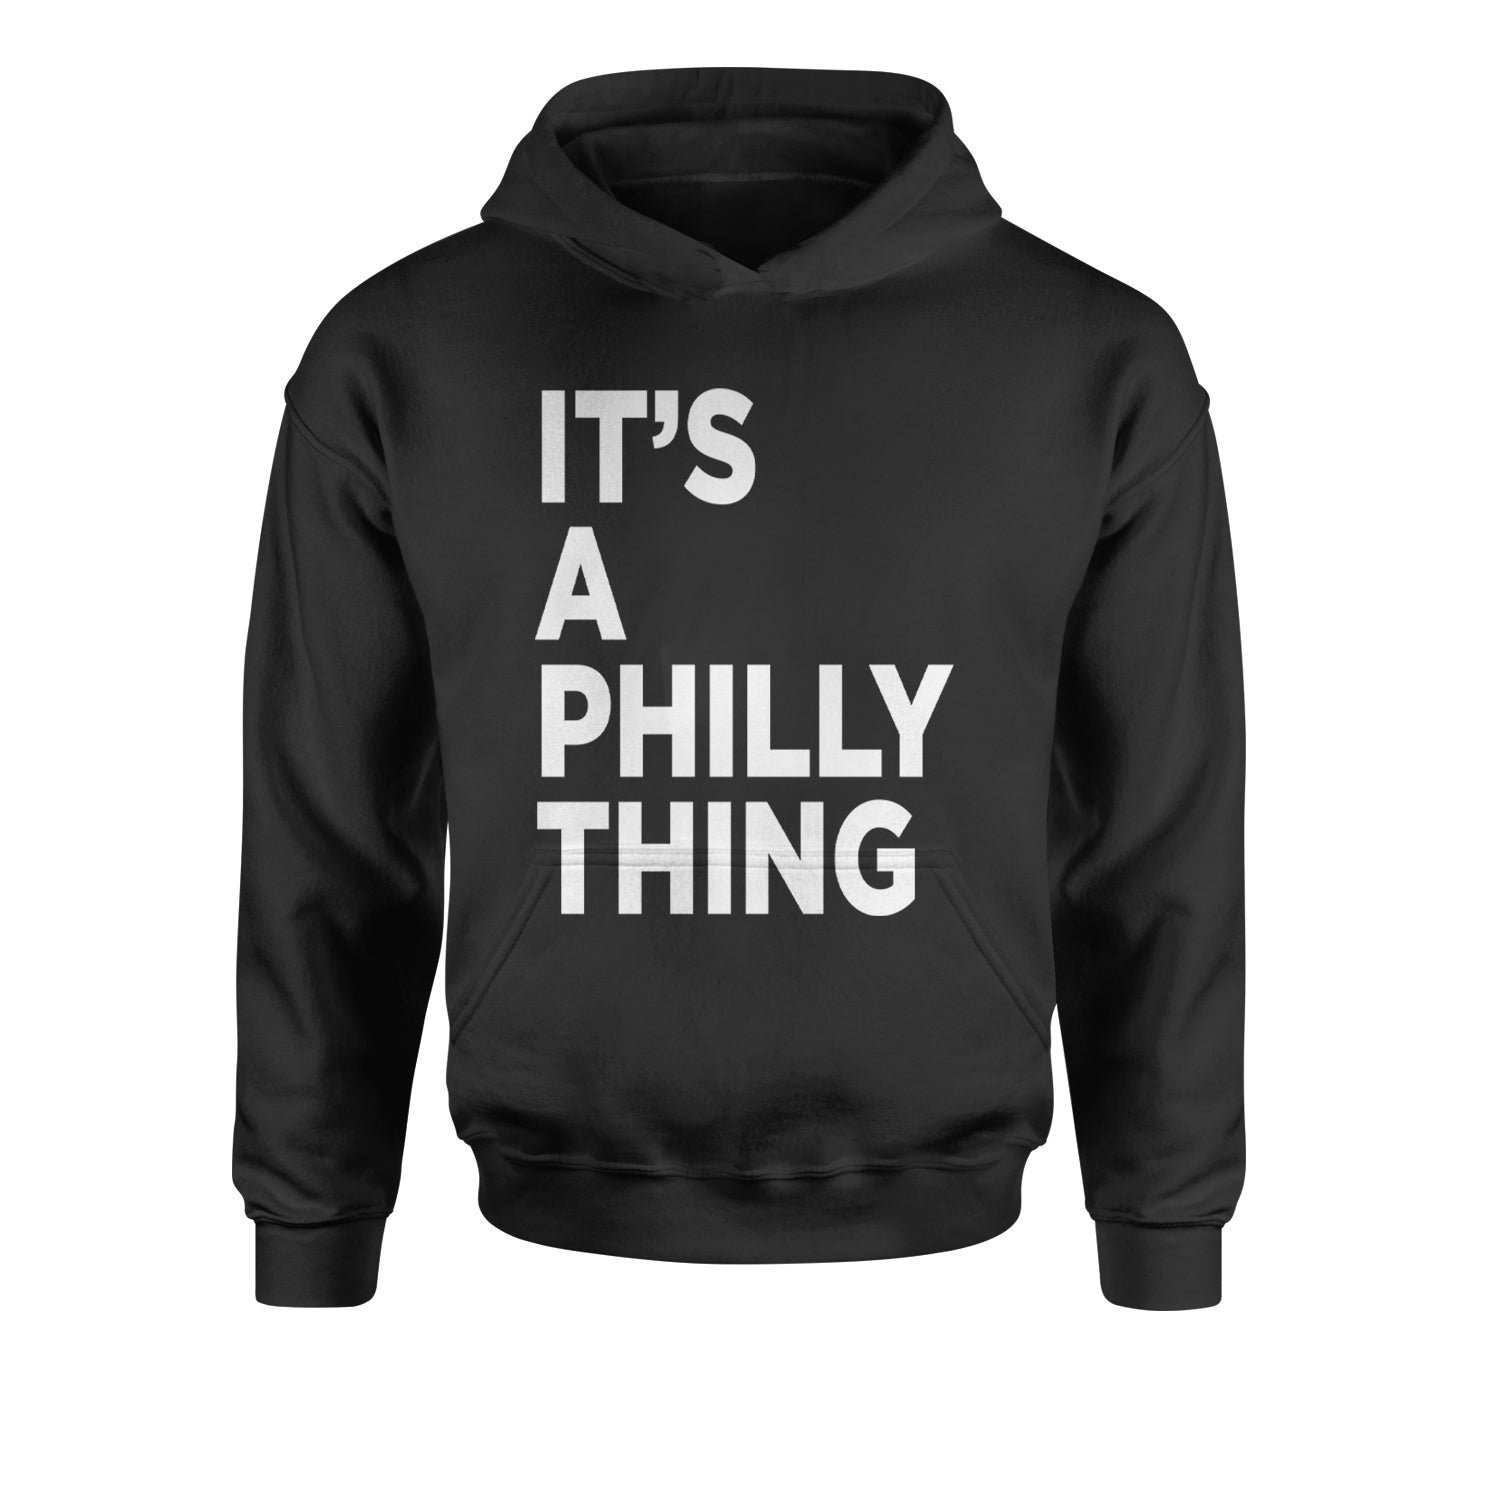 PHILLY It's A Philly Thing Youth-Sized Hoodie baseball, dilly, filly, football, jawn, morgan, Philadelphia, philli by Expression Tees